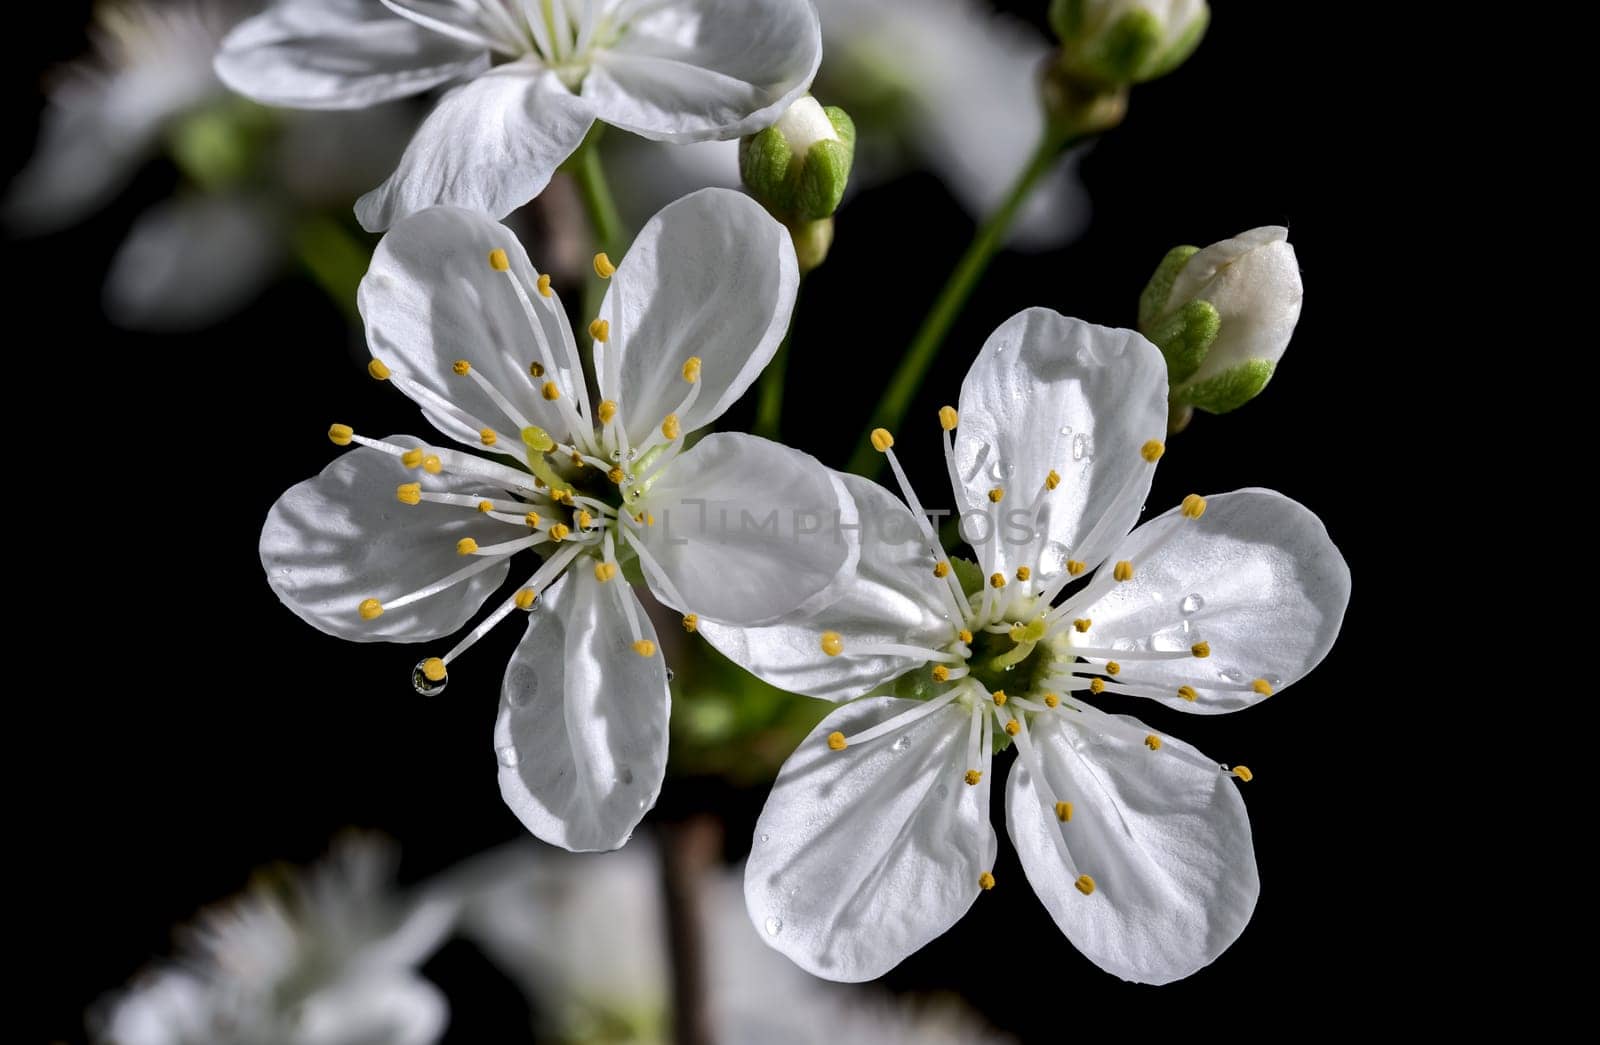 Blooming white cherry tree flowers on a black background by Multipedia